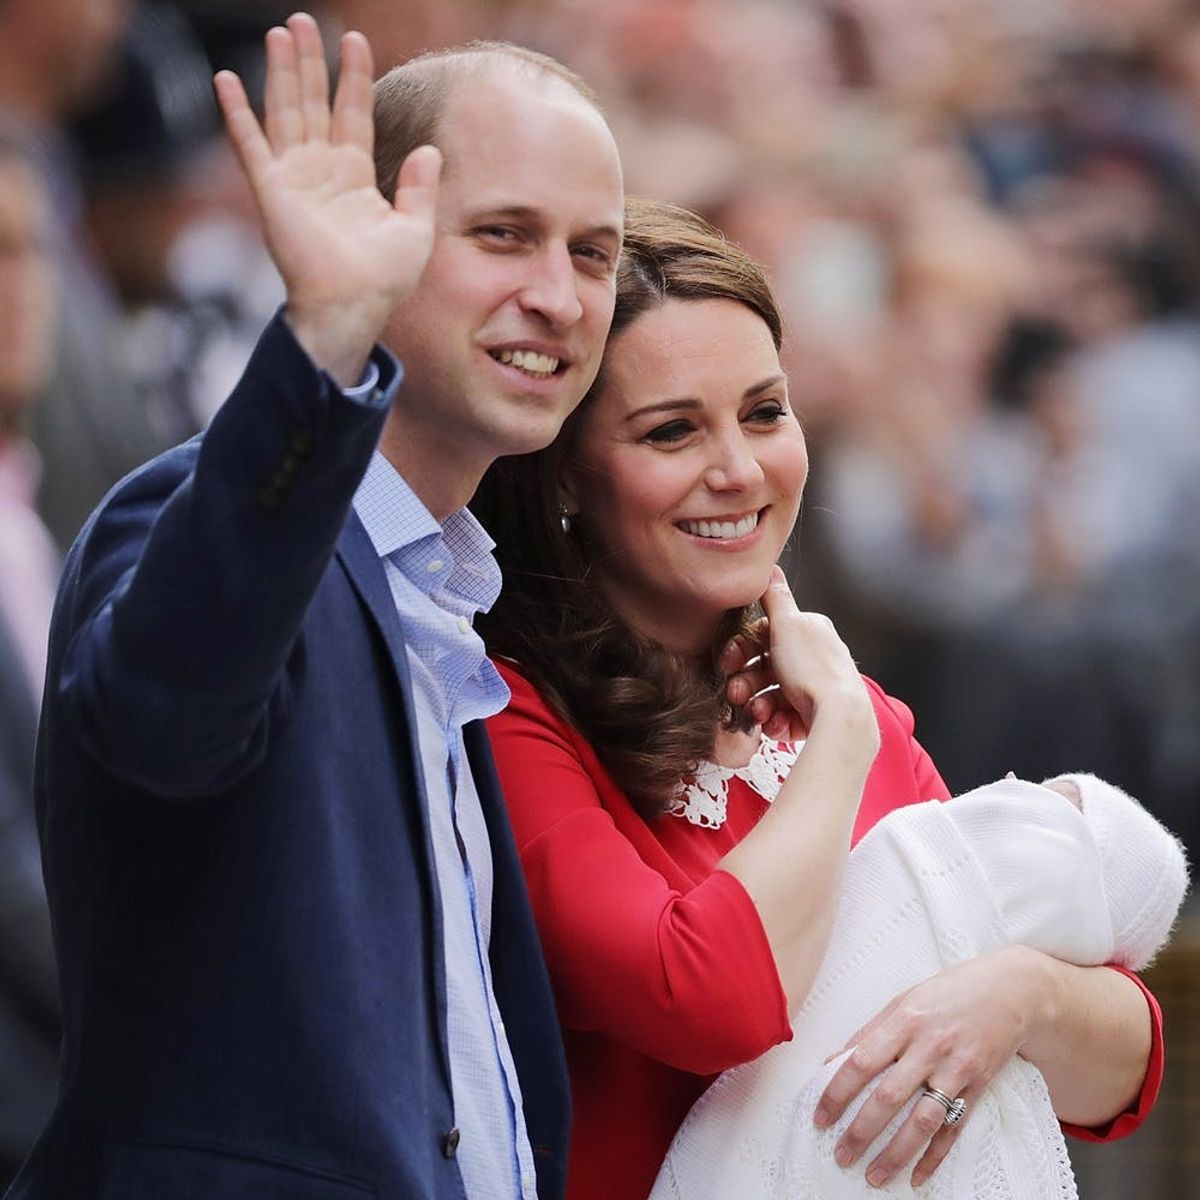 Prince William and Duchess Kate Middleton Reveal the Royal Baby’s Name